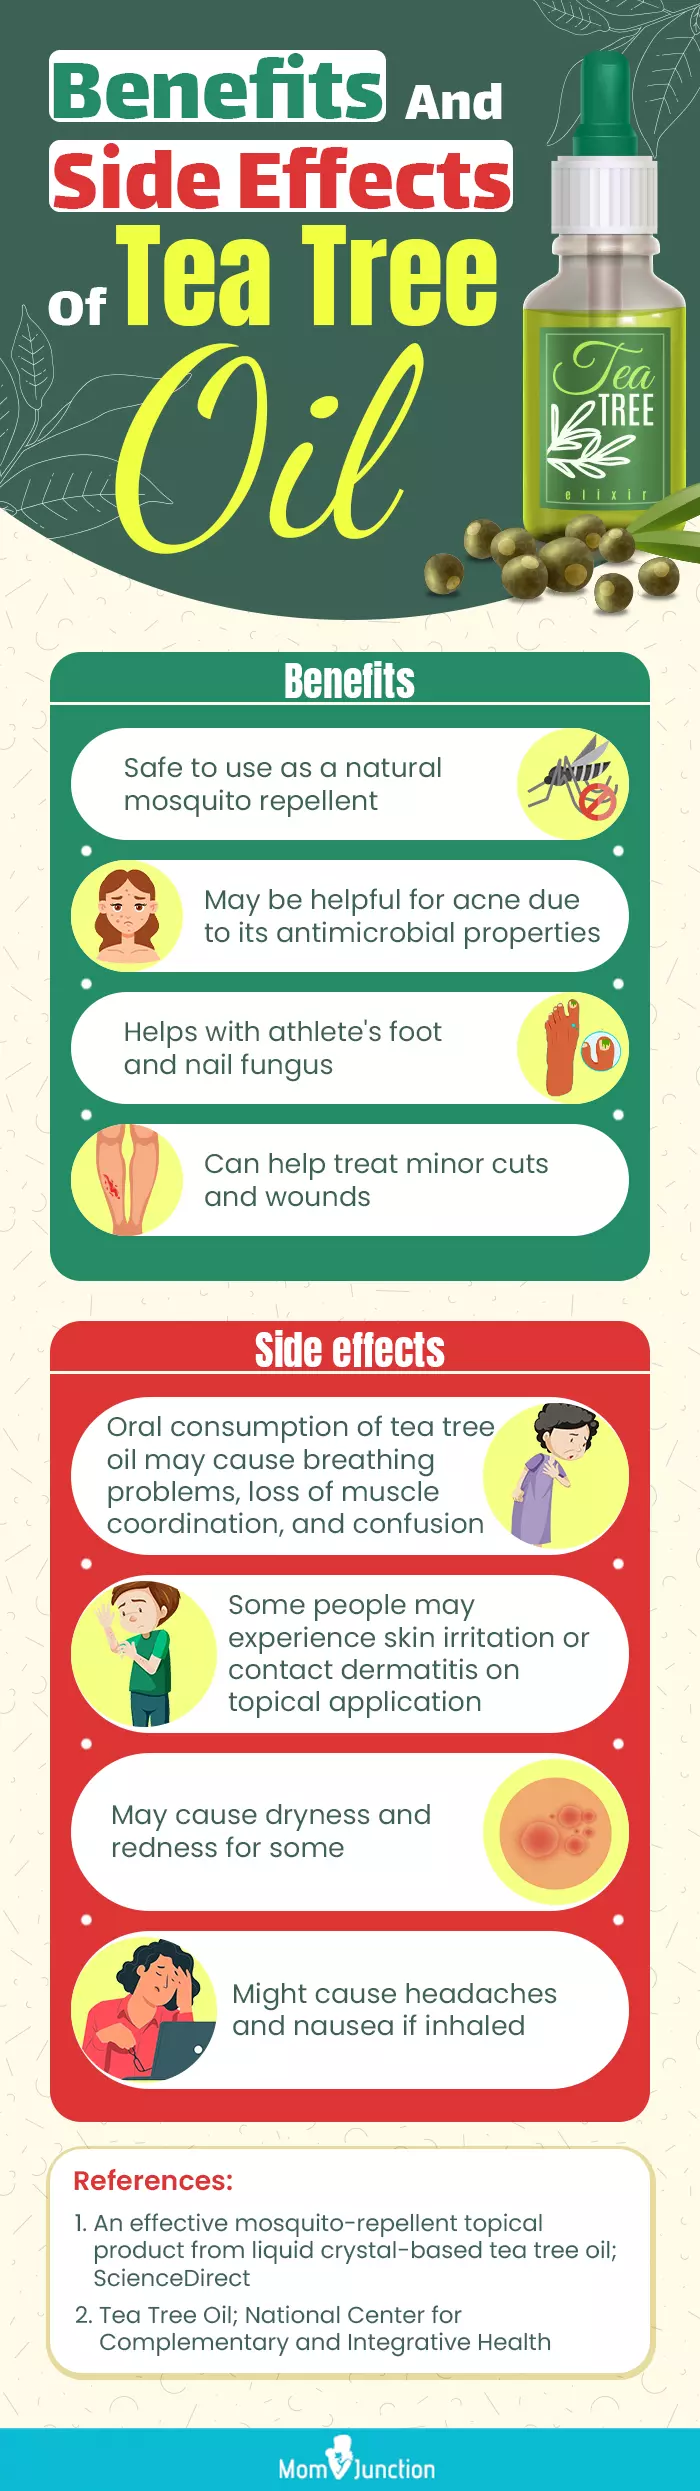 Benefits And Side Effects Of Tea Tree Oil (Infographic)